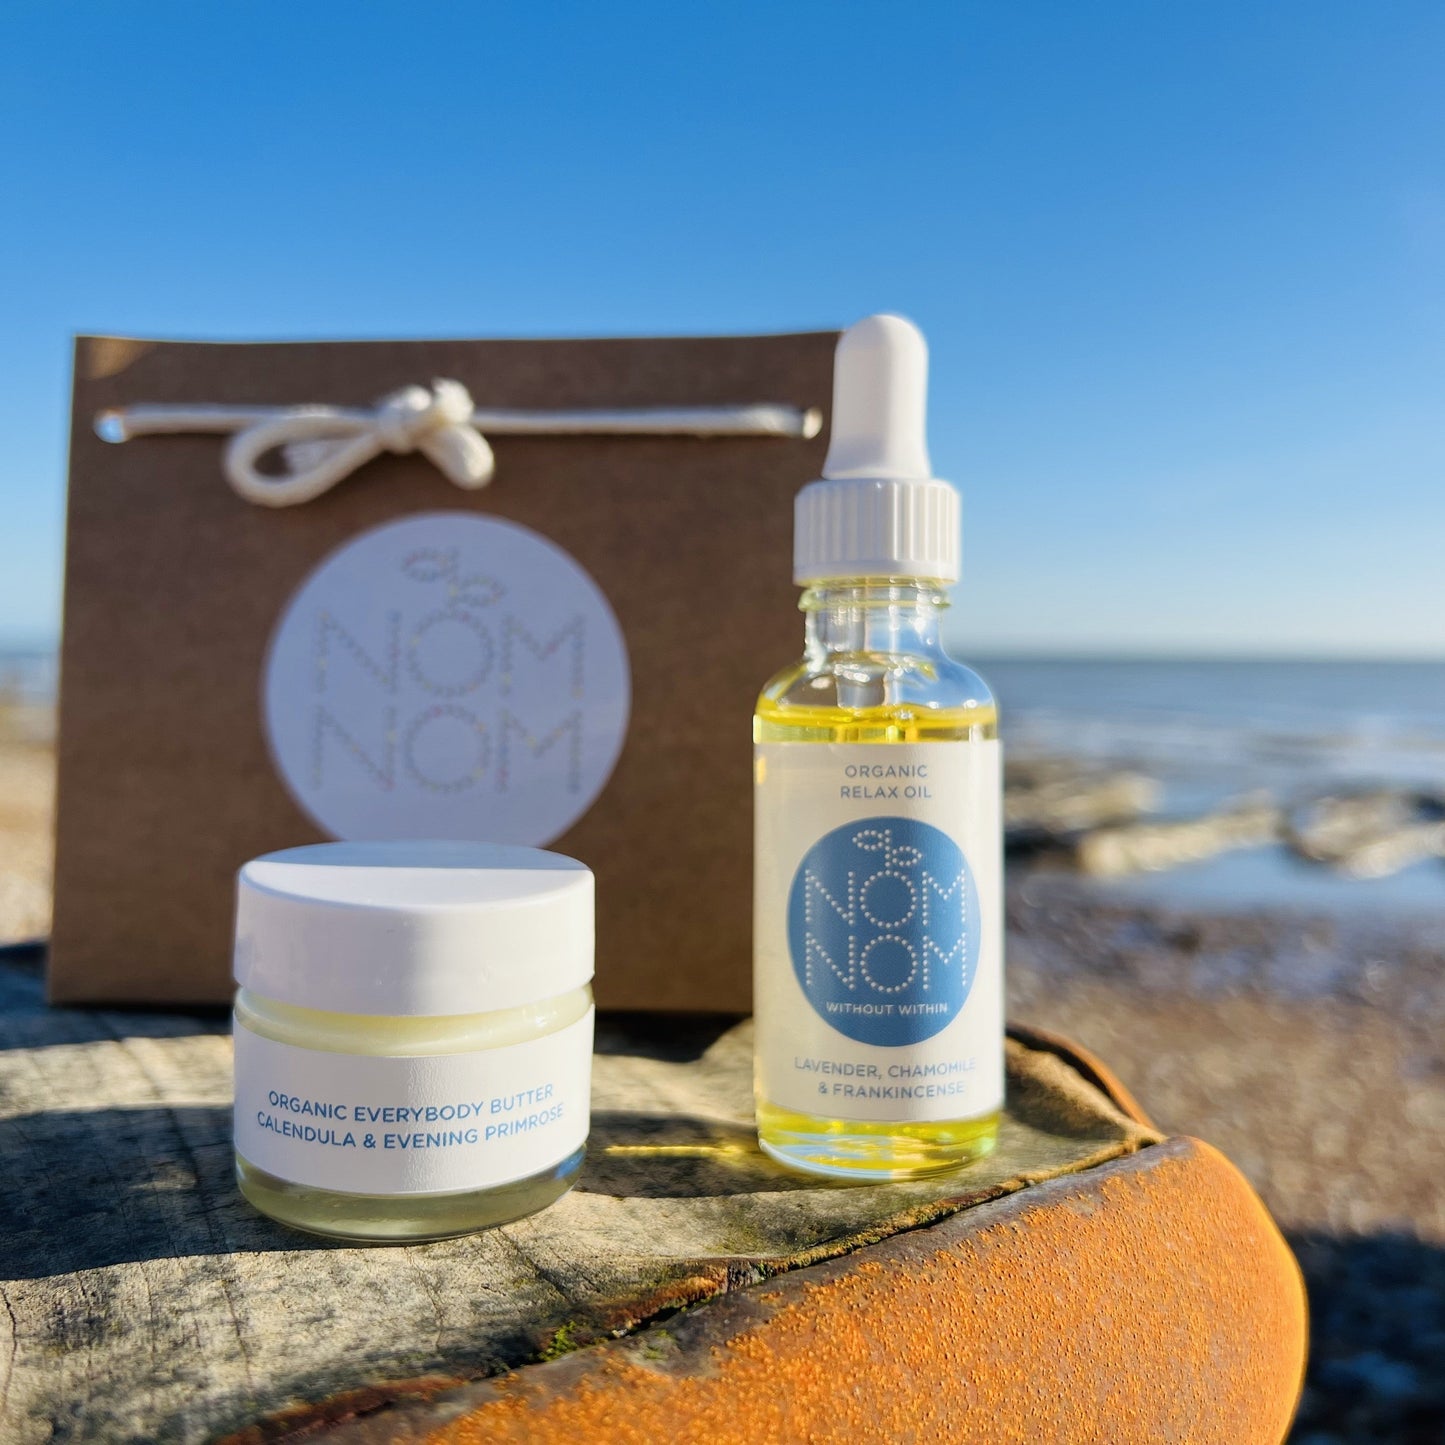 the nom nom skincare face and body relaxing skincare gift set is sitting on a wooden and metal surface that has rusted. in the foreground you can see the glass pipette bottle and jar containing the gentle skincare and the brown kraft gift bag behind it. in the background, although it is blurred, you can see that the photo is taking place on a sunny pebble beach with the tide out and pools of water everywhere